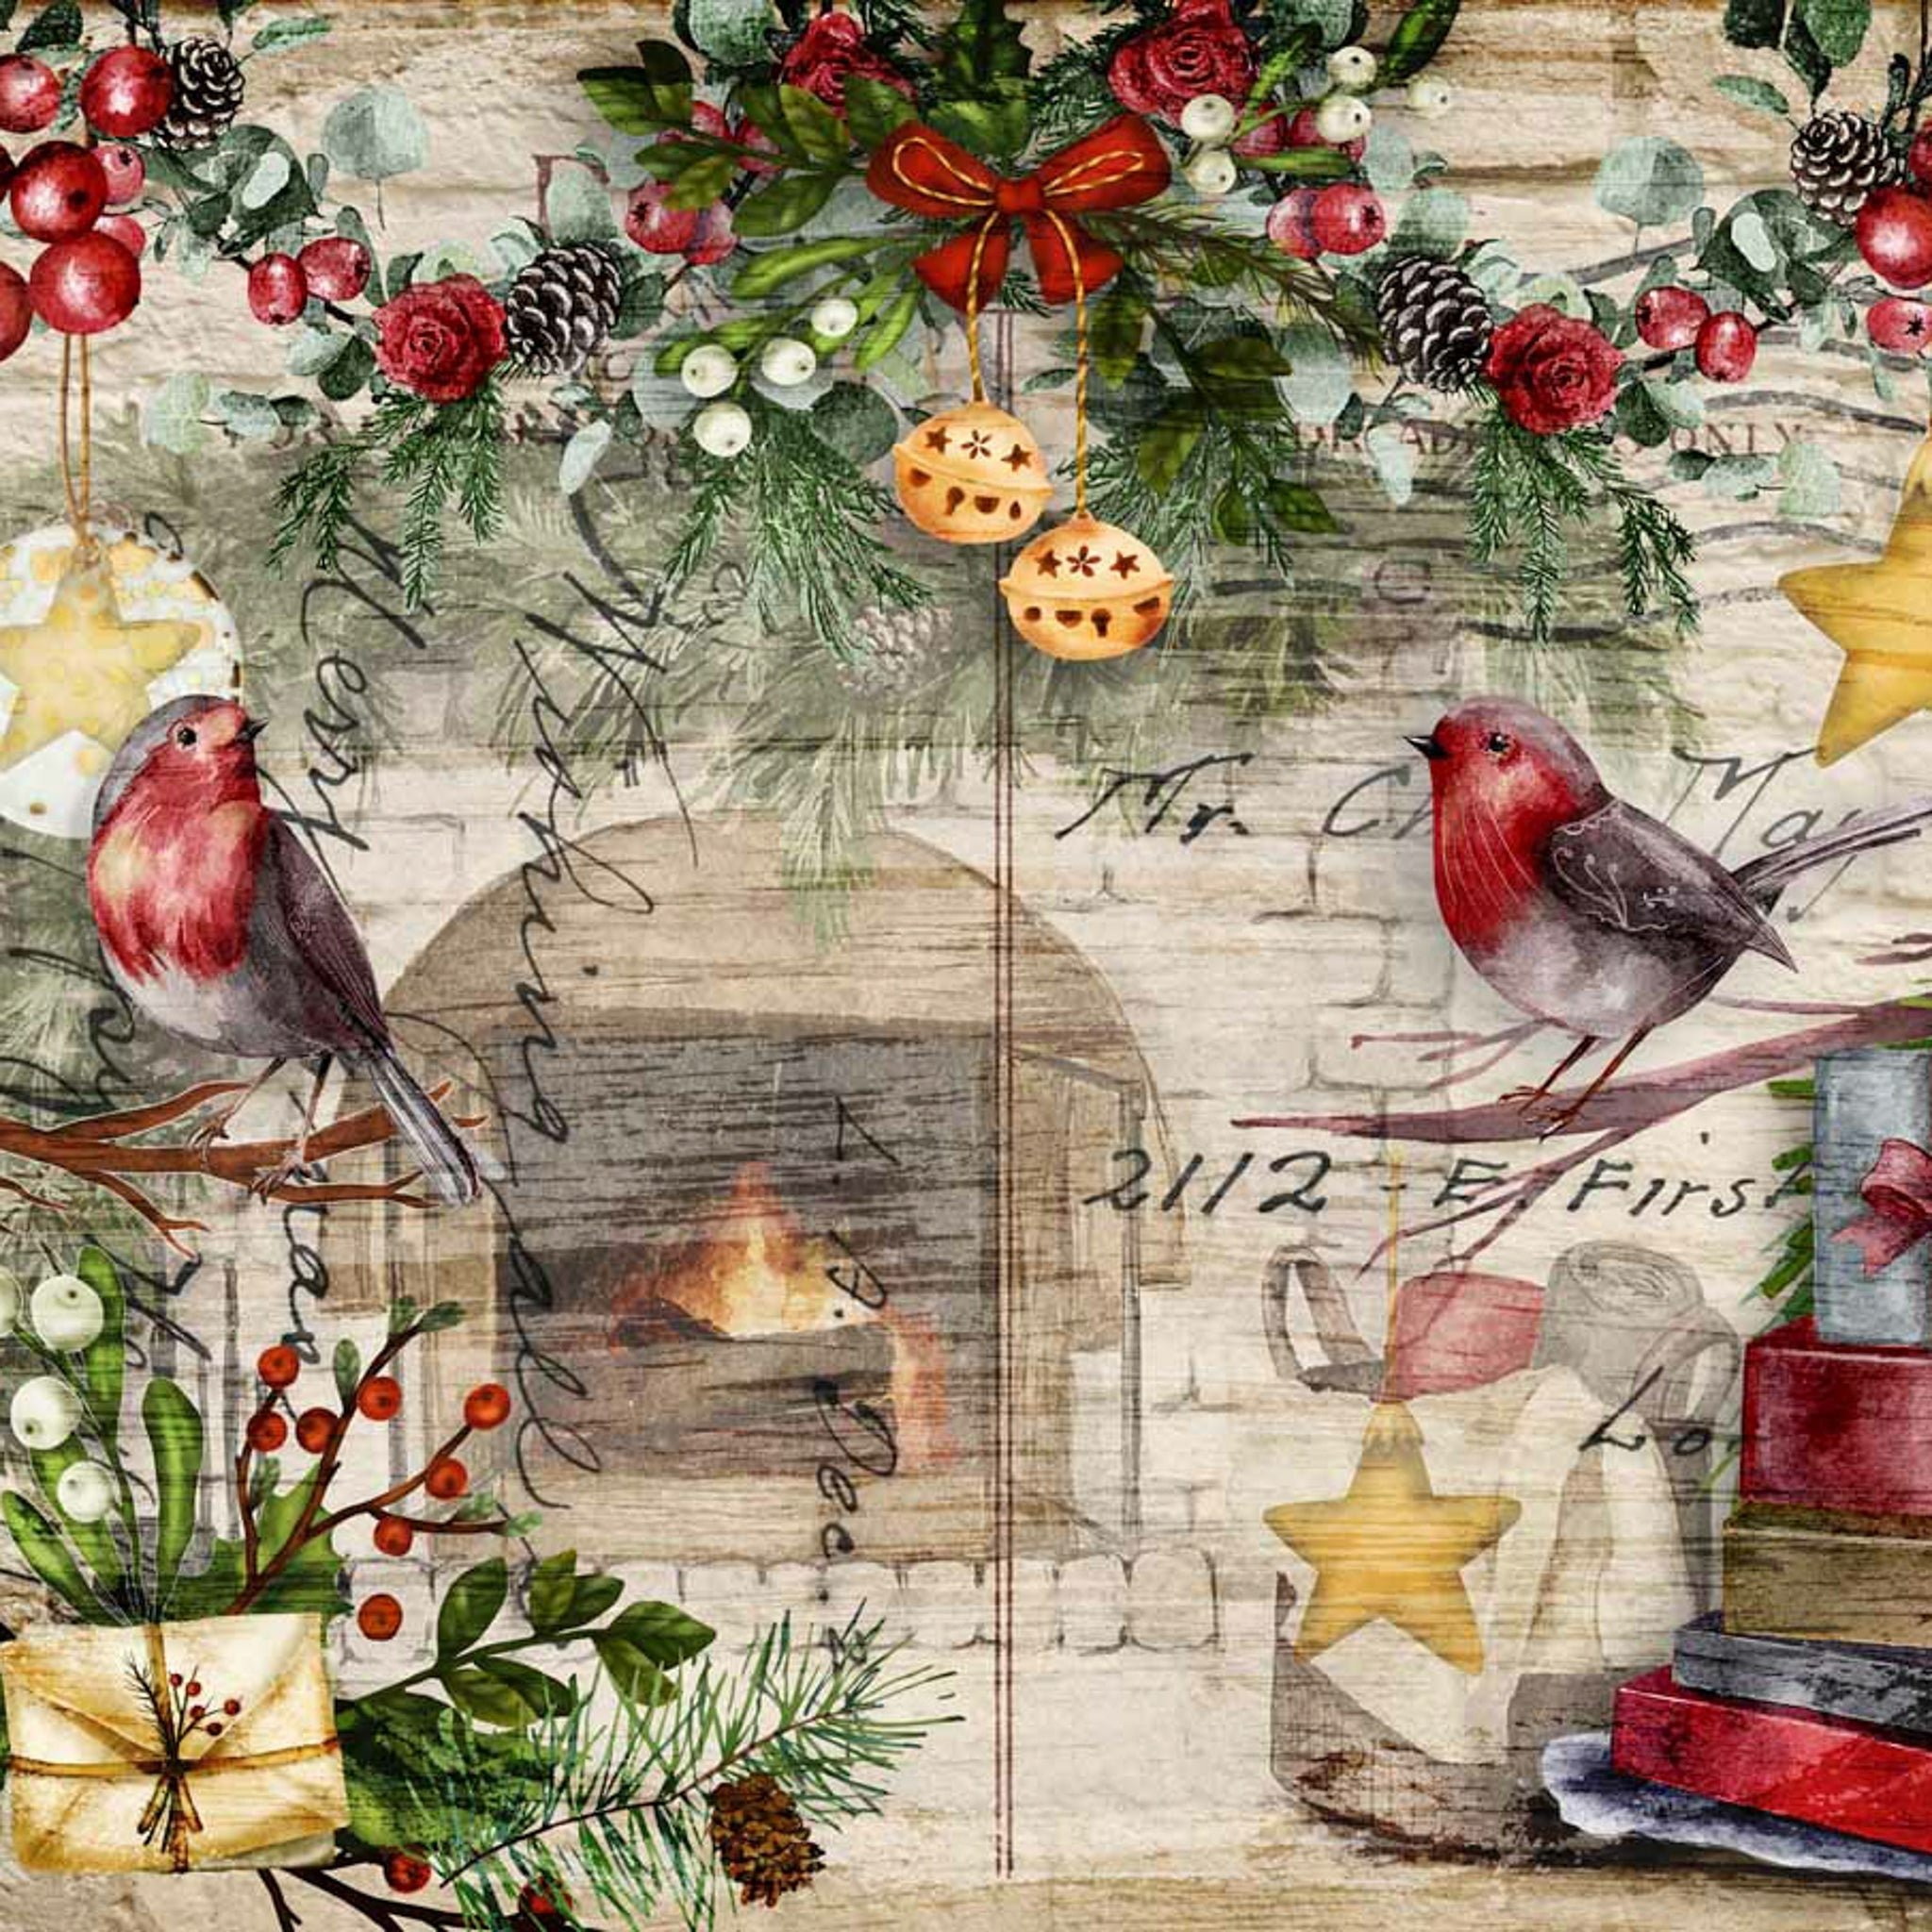 A3 rice paper design that features red robins and holiday garland against a faded background of a white brick-lined fireplace.